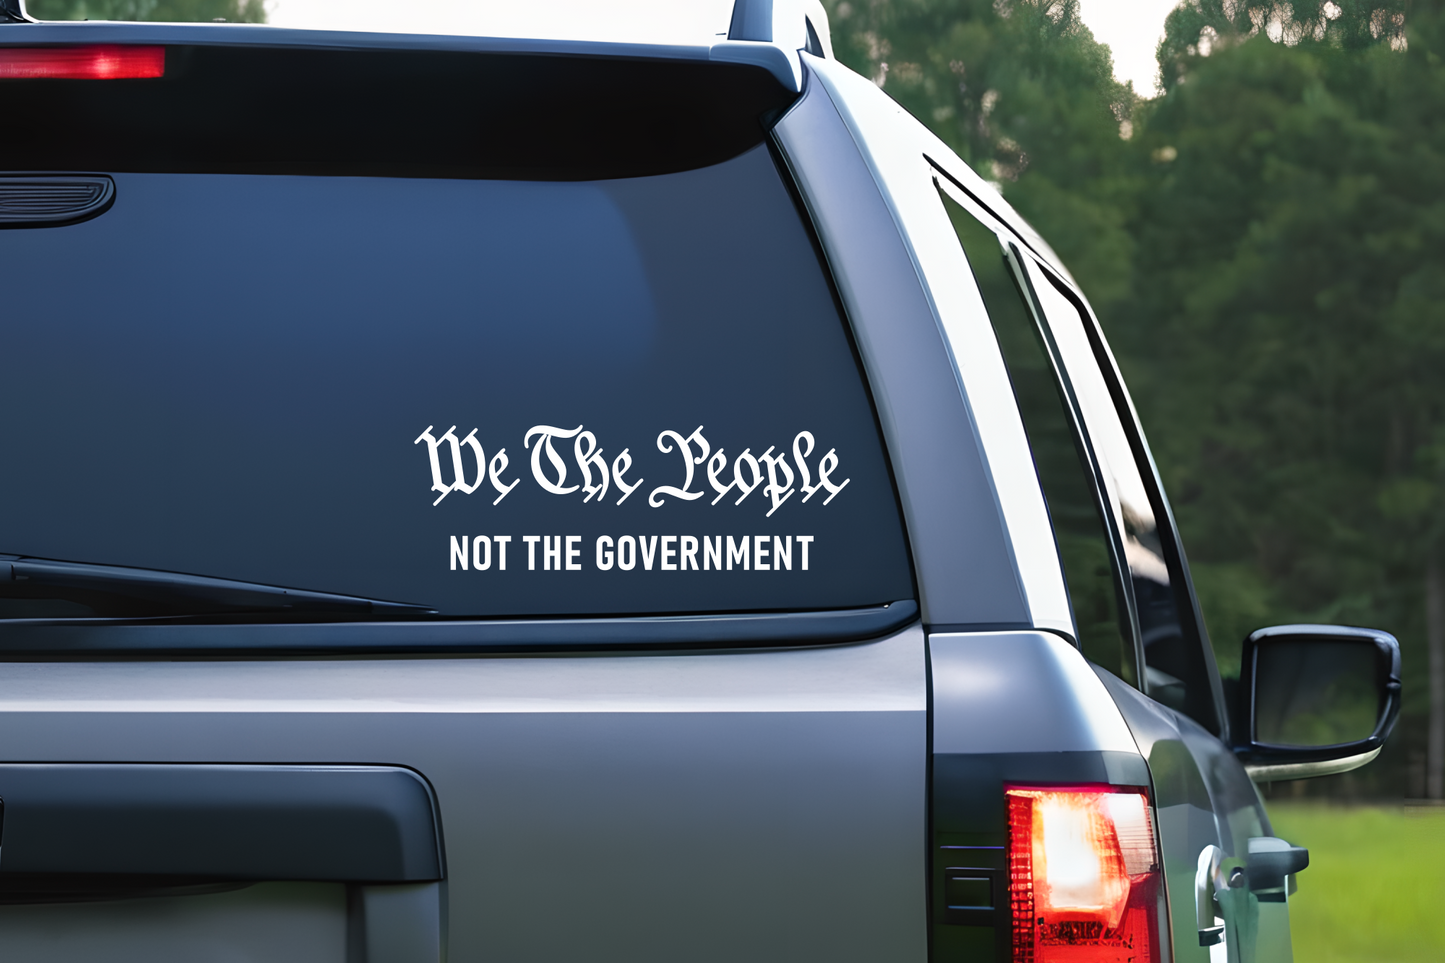 We The People Not The Government 1776 Constitutional Vinyl Decal Sticker for Car Window